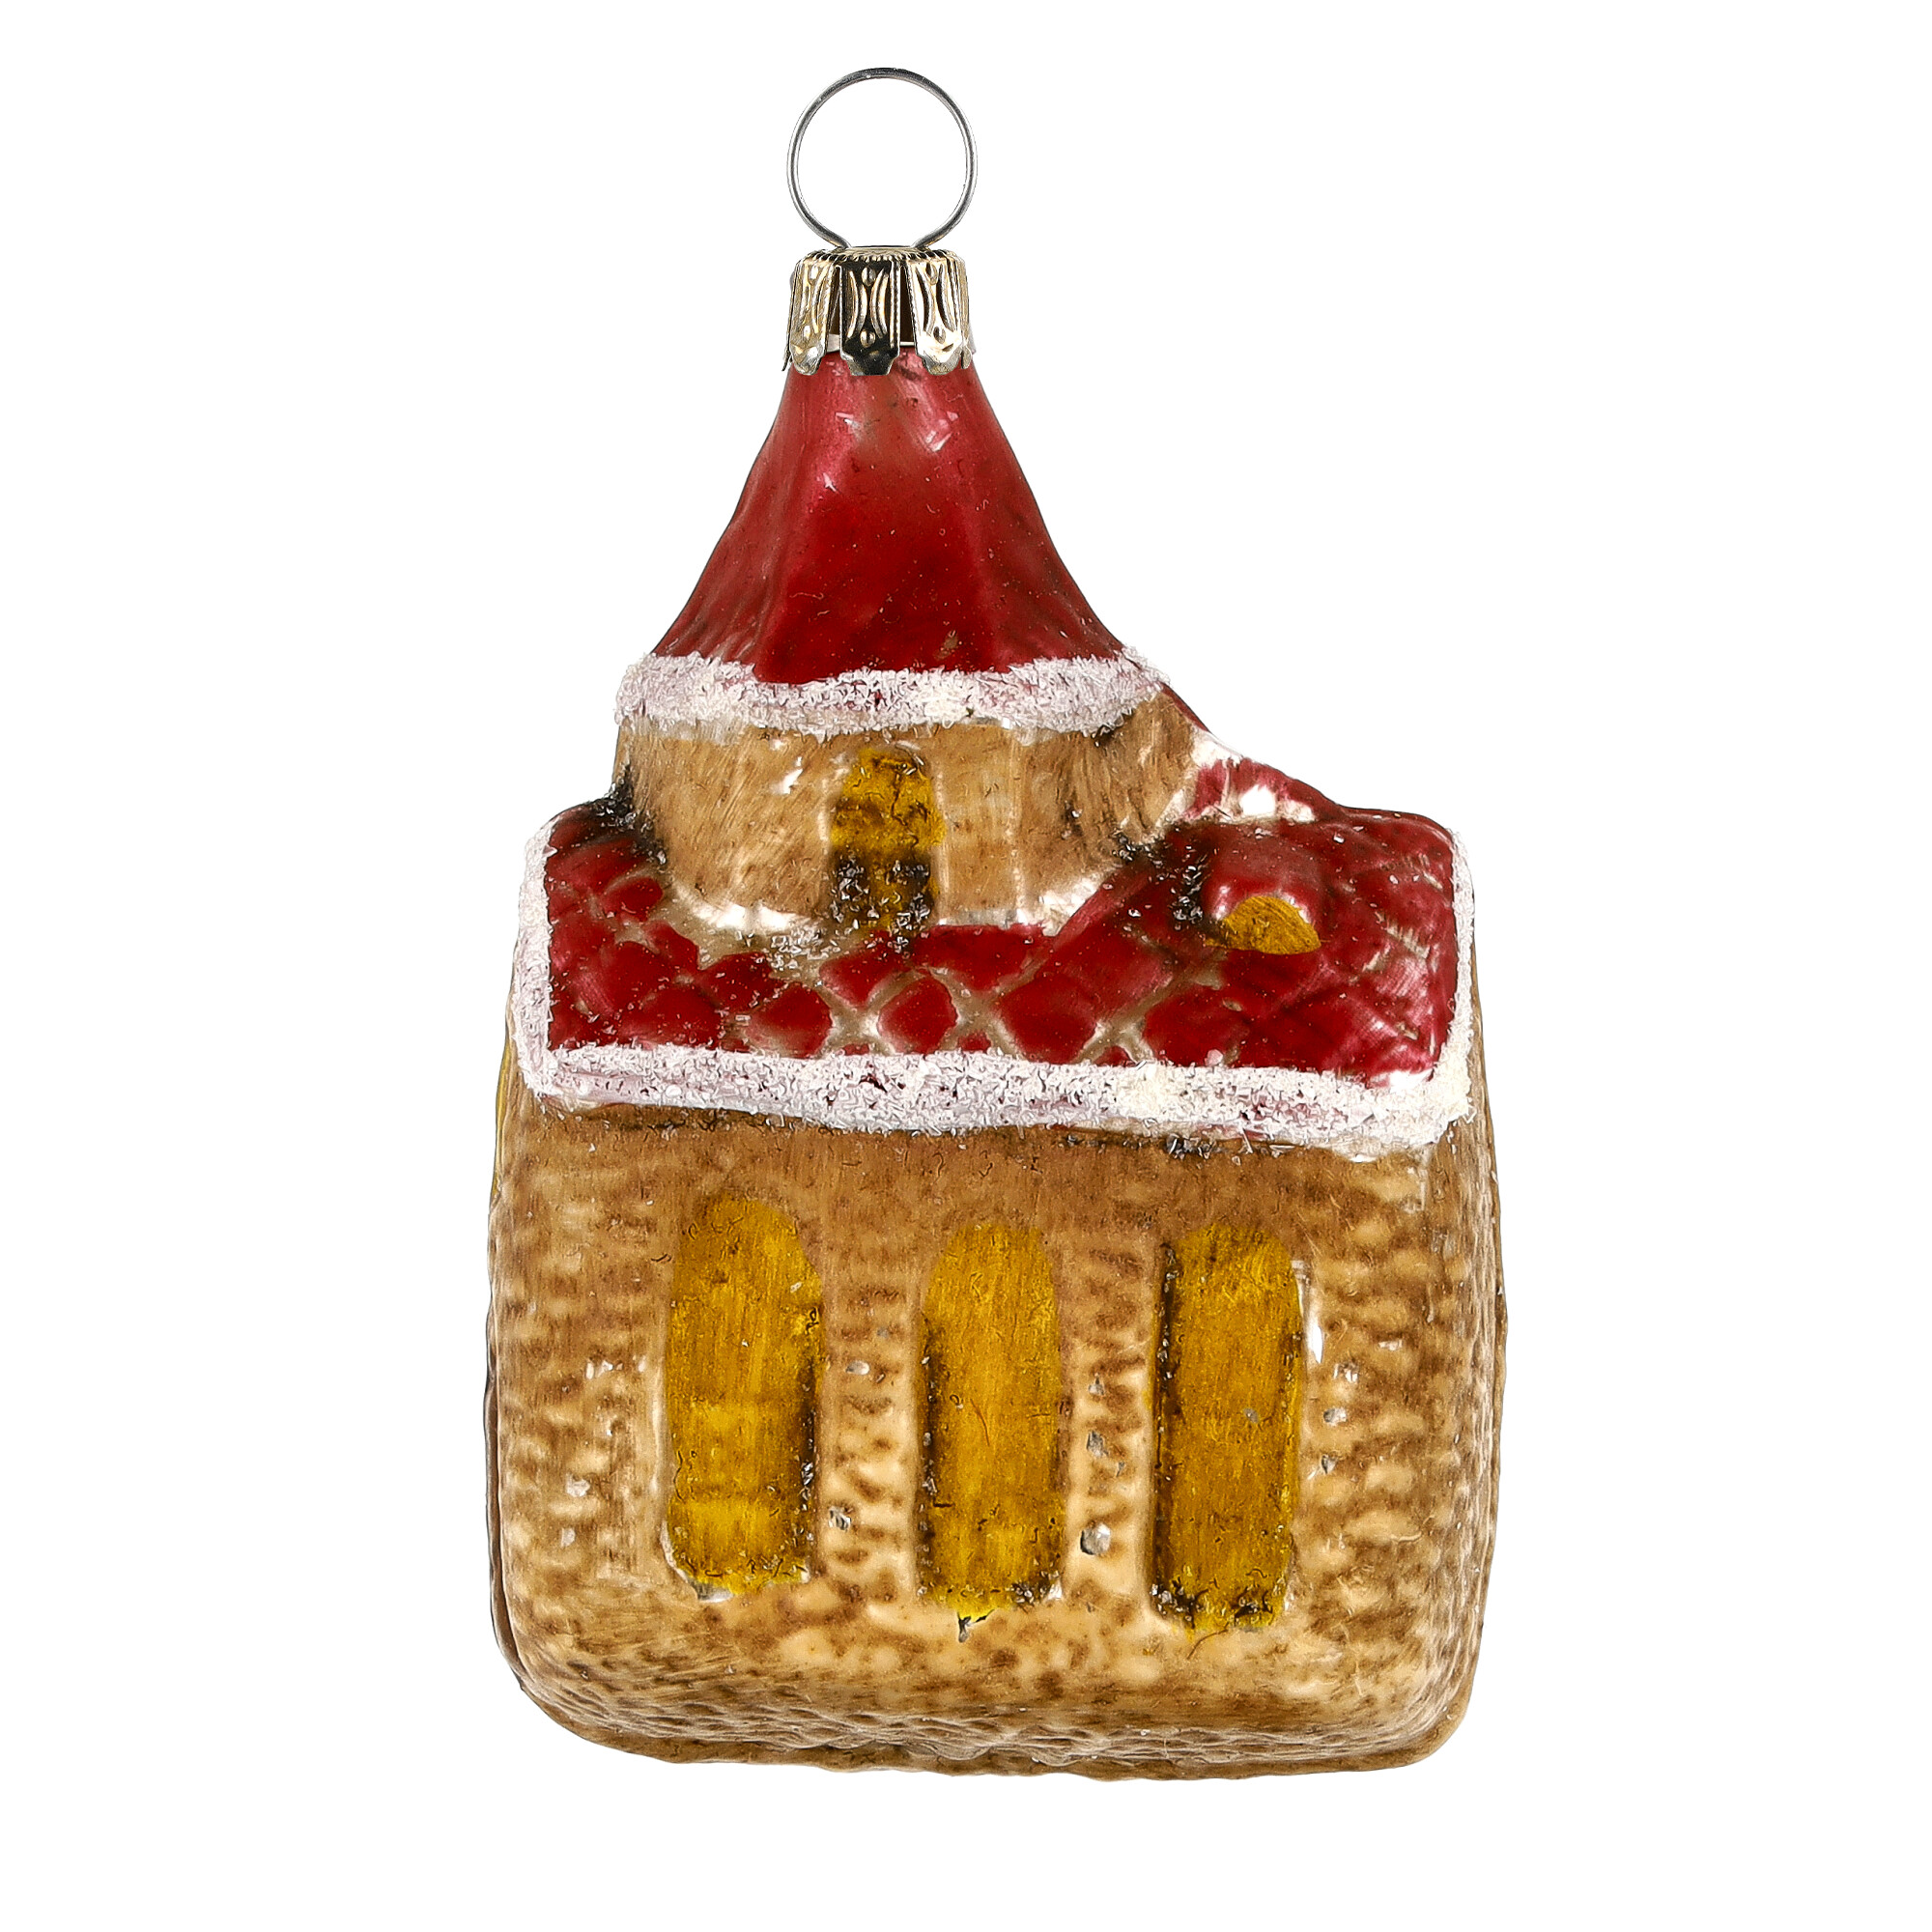 Retro Vintage style Christmas Glass Ornament - Church with red roof